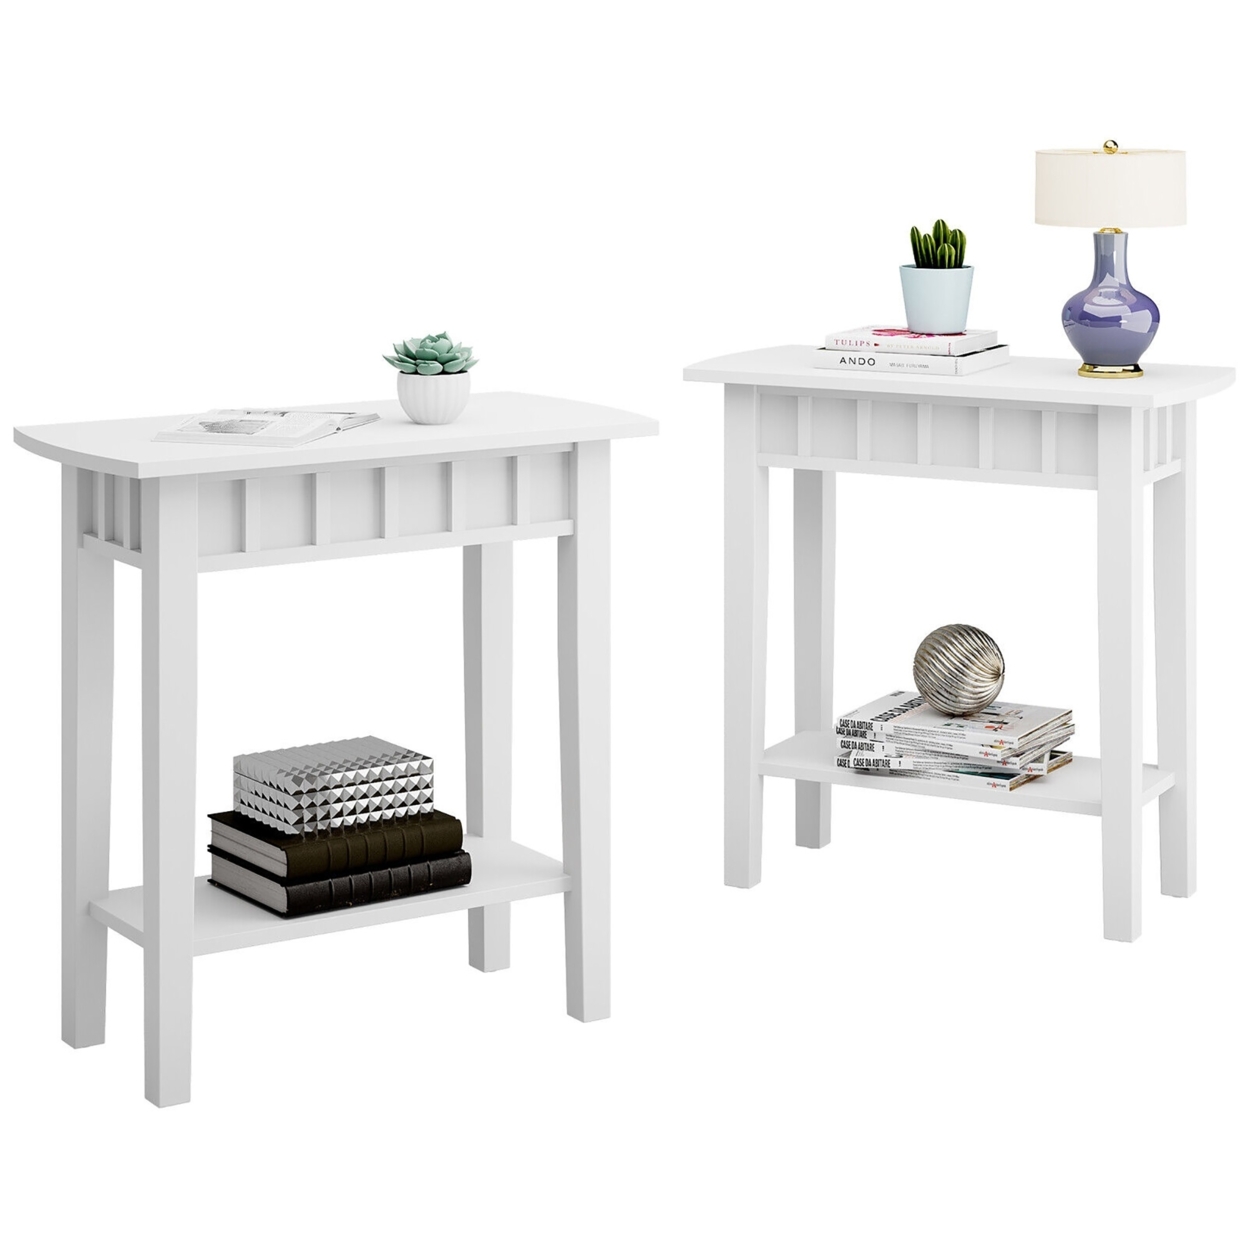 2PCS 2-tier Side End Sofa Coffee Table Nightstand For Bedroom Living Room - White